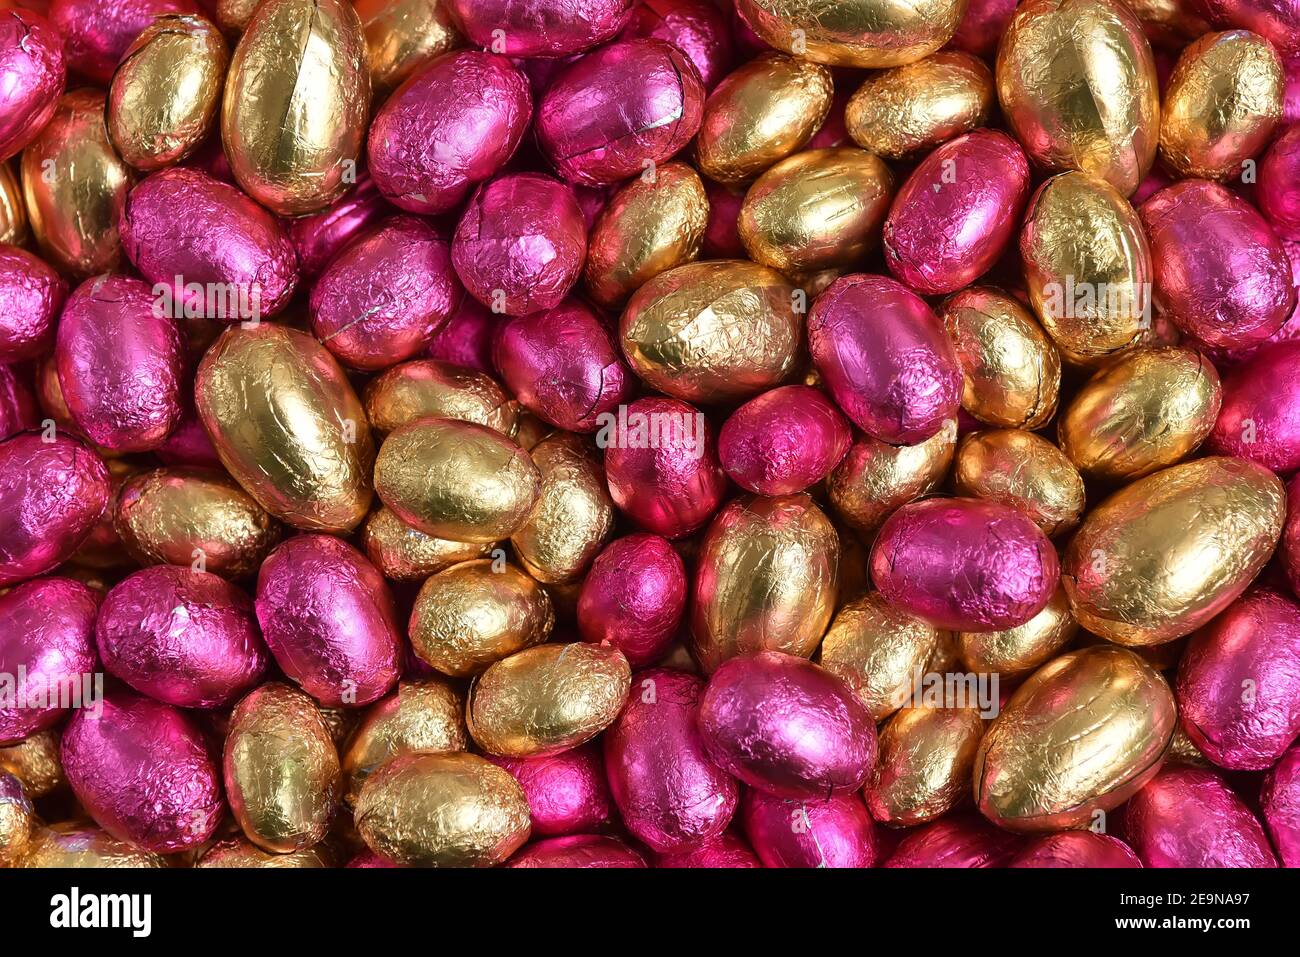 Large & small pink and gold foil wrapped chocolate easter eggs, against a peach orange background. Stock Photo